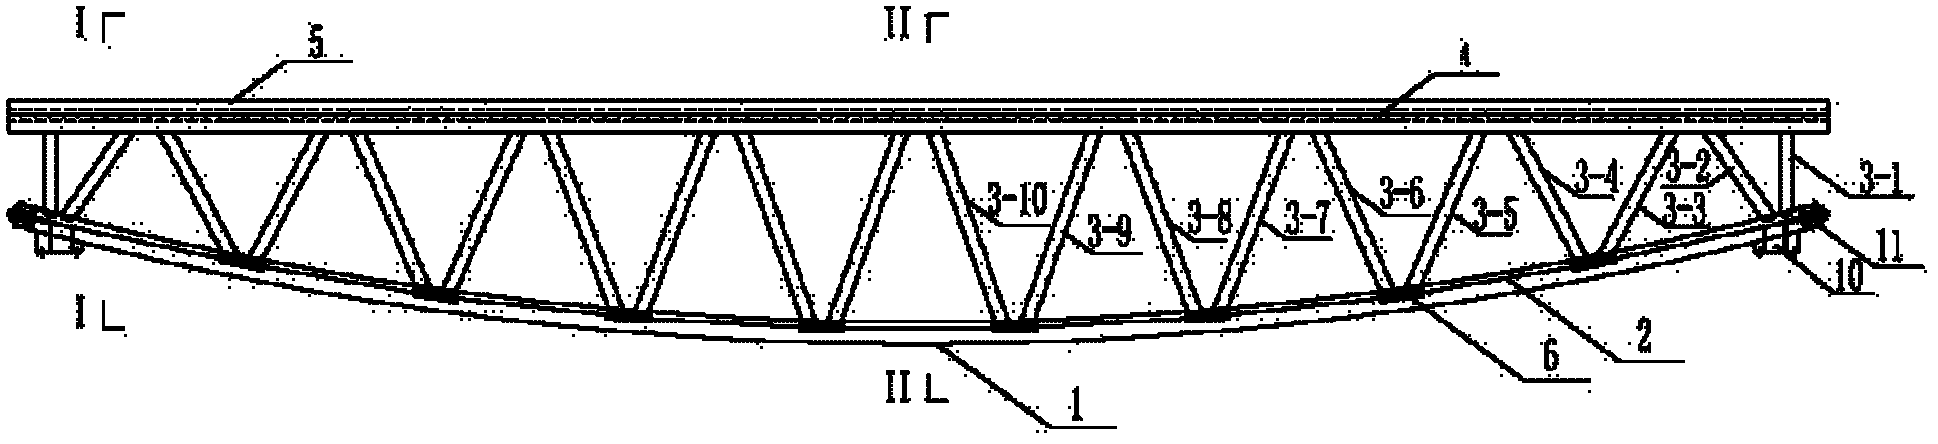 In-pipe prestressed steel-pipe truss composite simply-supported beam structure